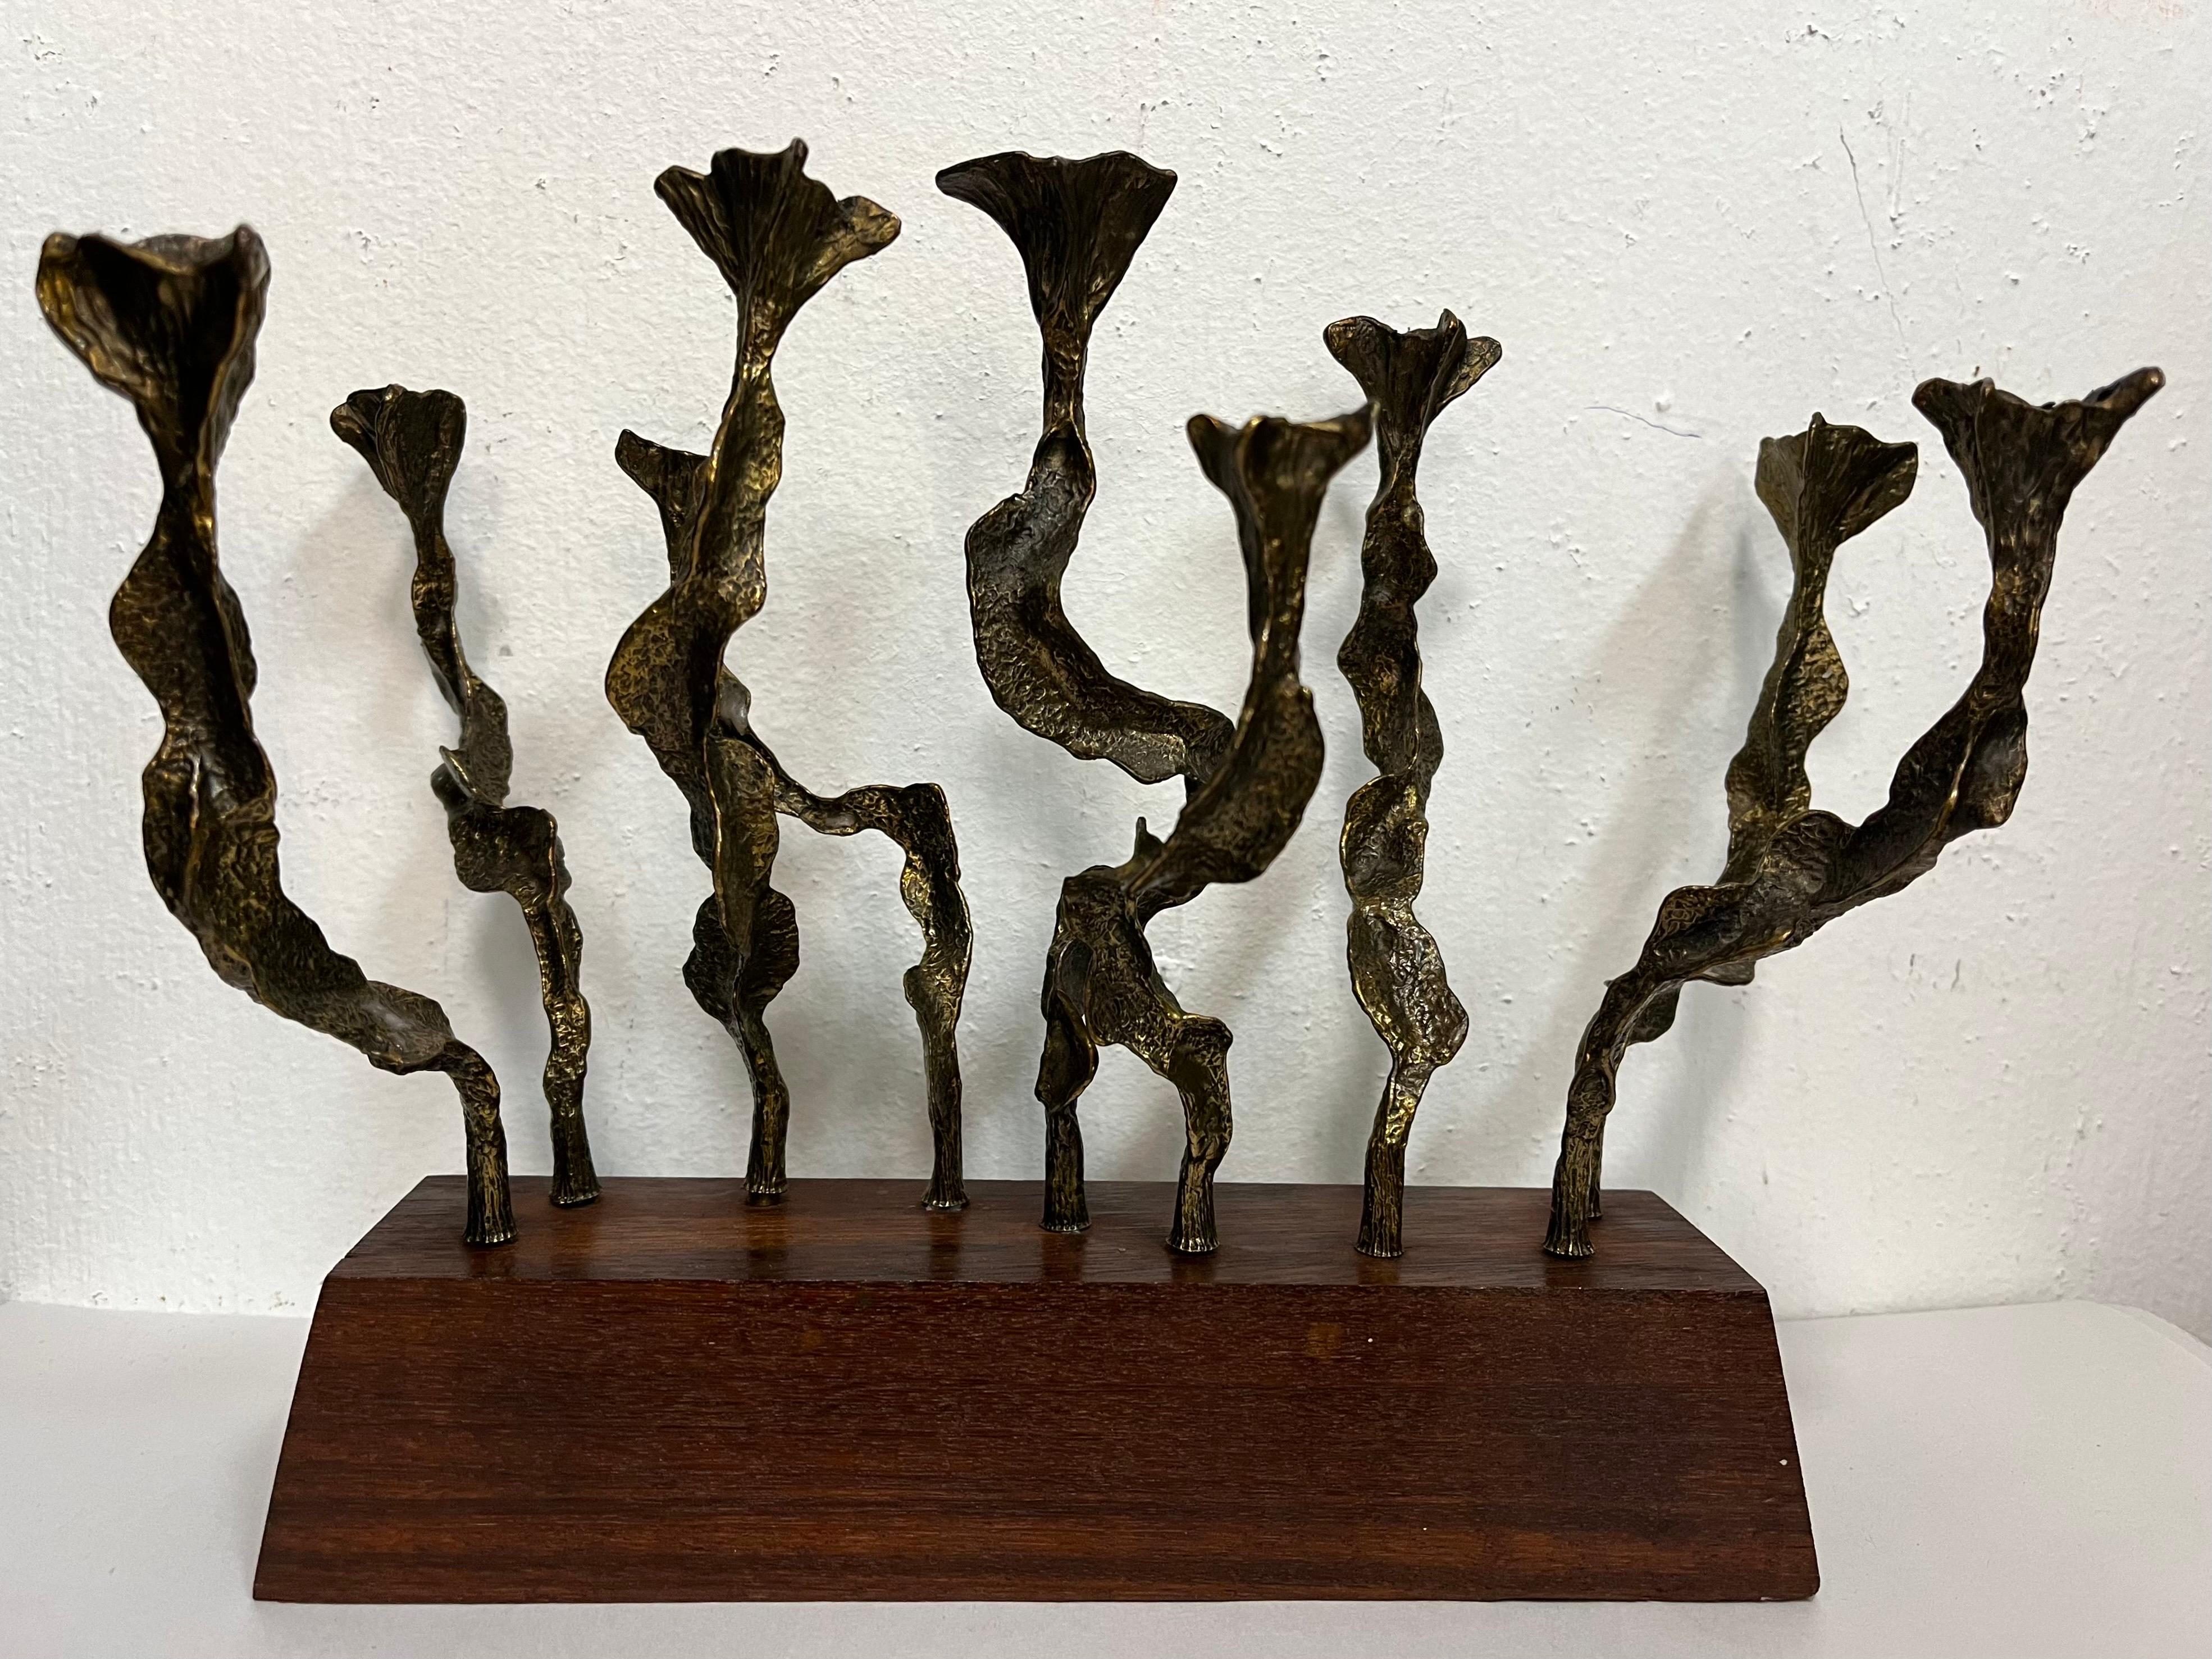 A vintage, circa 1970s Brutalist and quite sculptural Menorah crafted of bronze and wood by Israeli artist Menachem Berman. The individual candle holders are each unique and highly detailed. The plinth, trapezoidal style base of wood has clean,